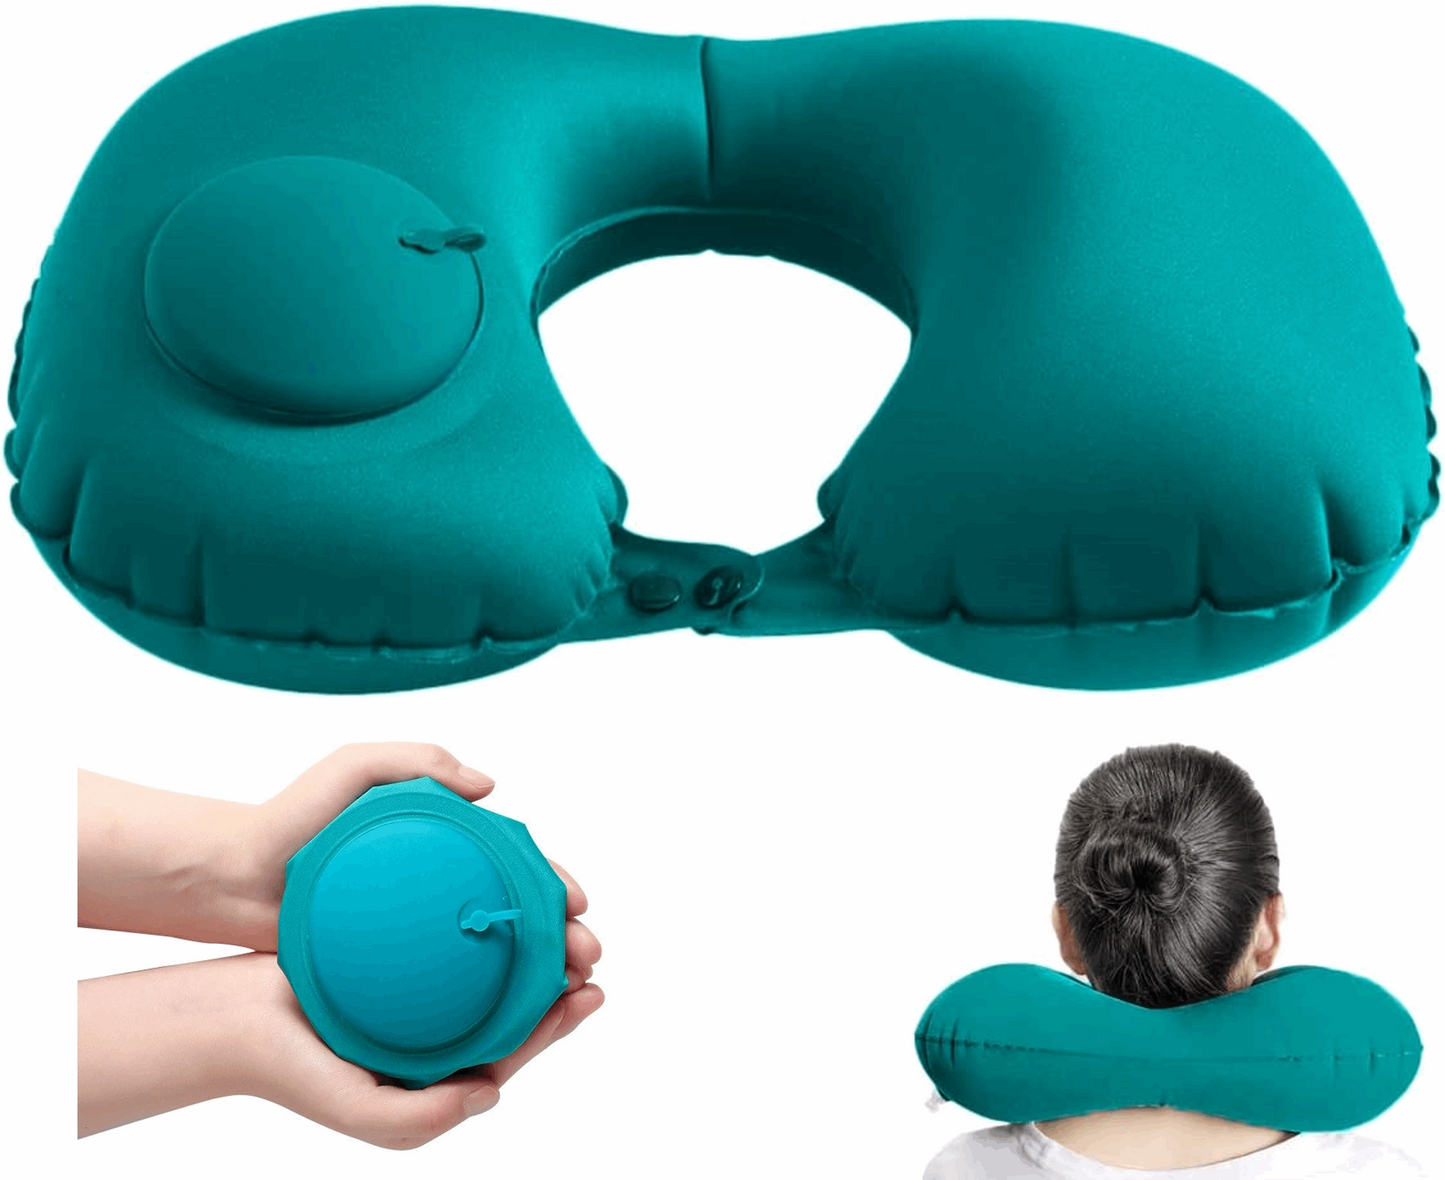 Inflatable Travel Pillow, soft, comfortable and compact